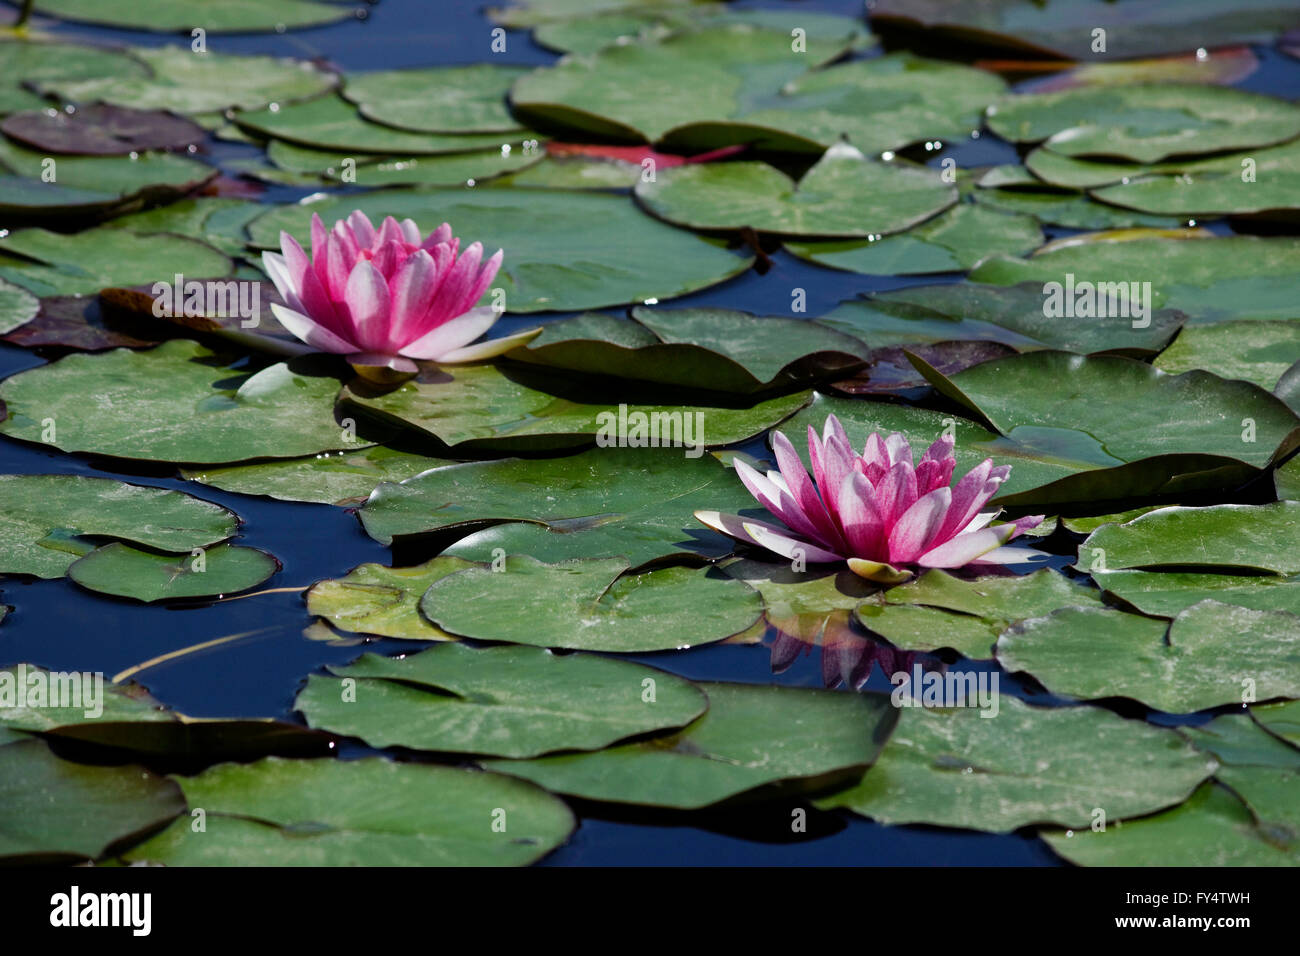 Two violet-coloured water lilies (waterlilies) aquatic herbs plants surrounded by floating green lily pads. Stock Photo